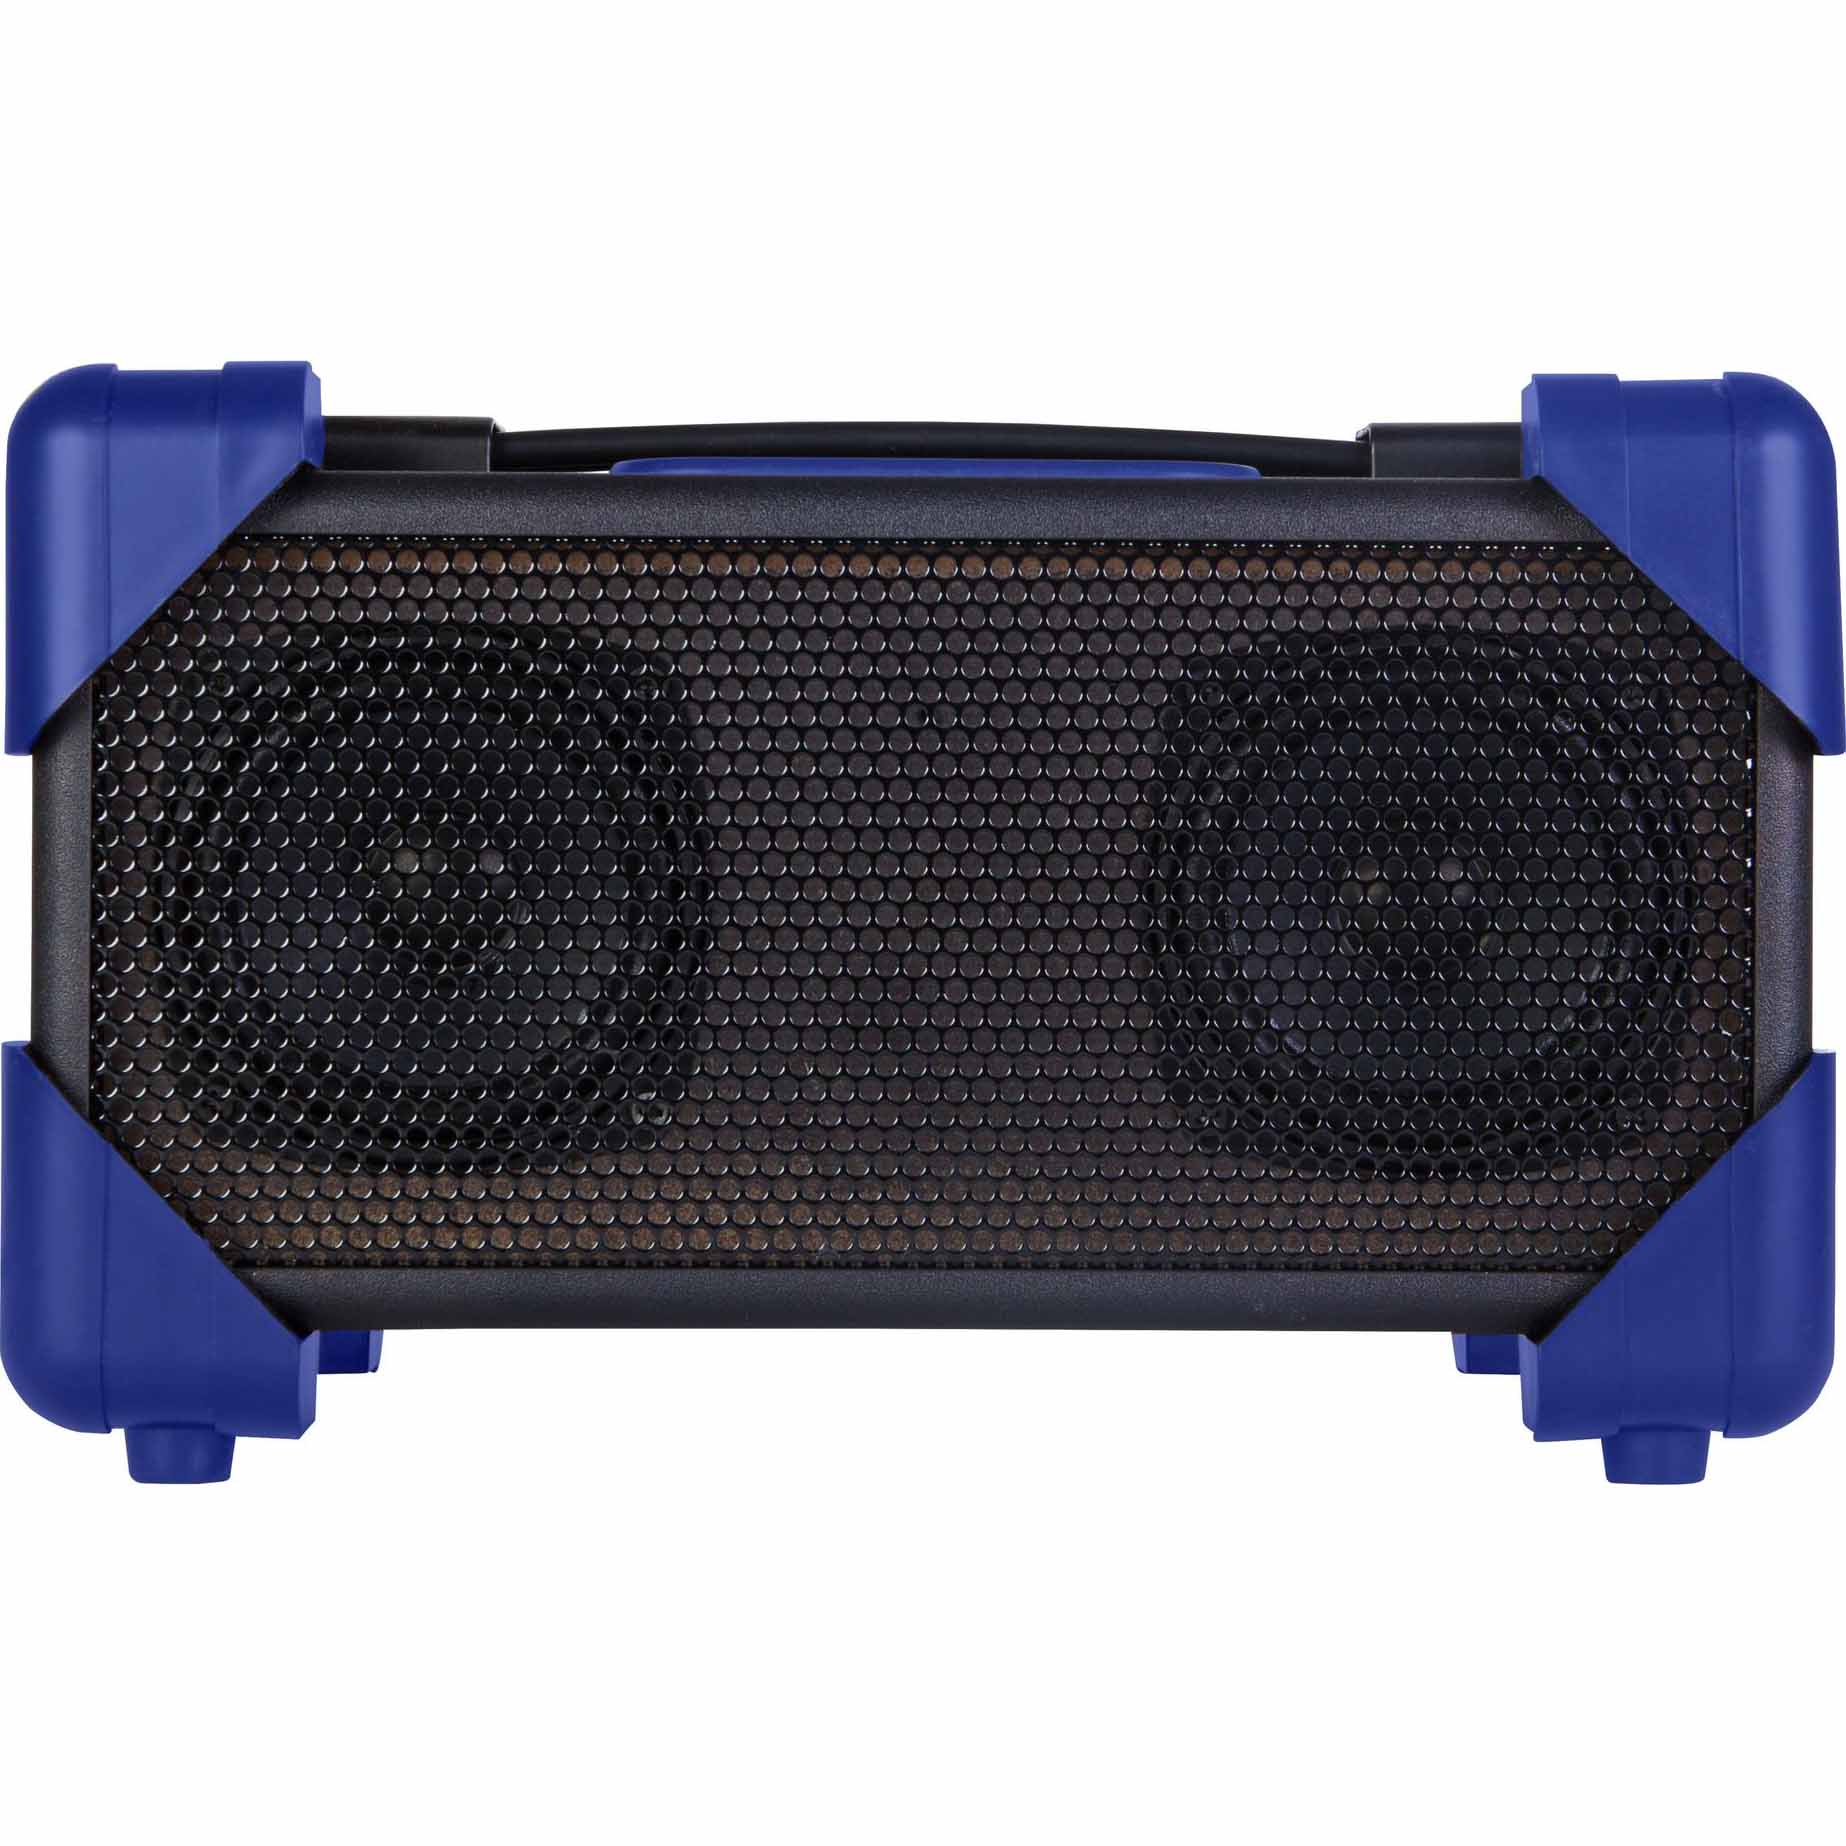 HOT! FREE Bluetooth Speakers at KMart! Get them now! Sell Out Risk HIGH!